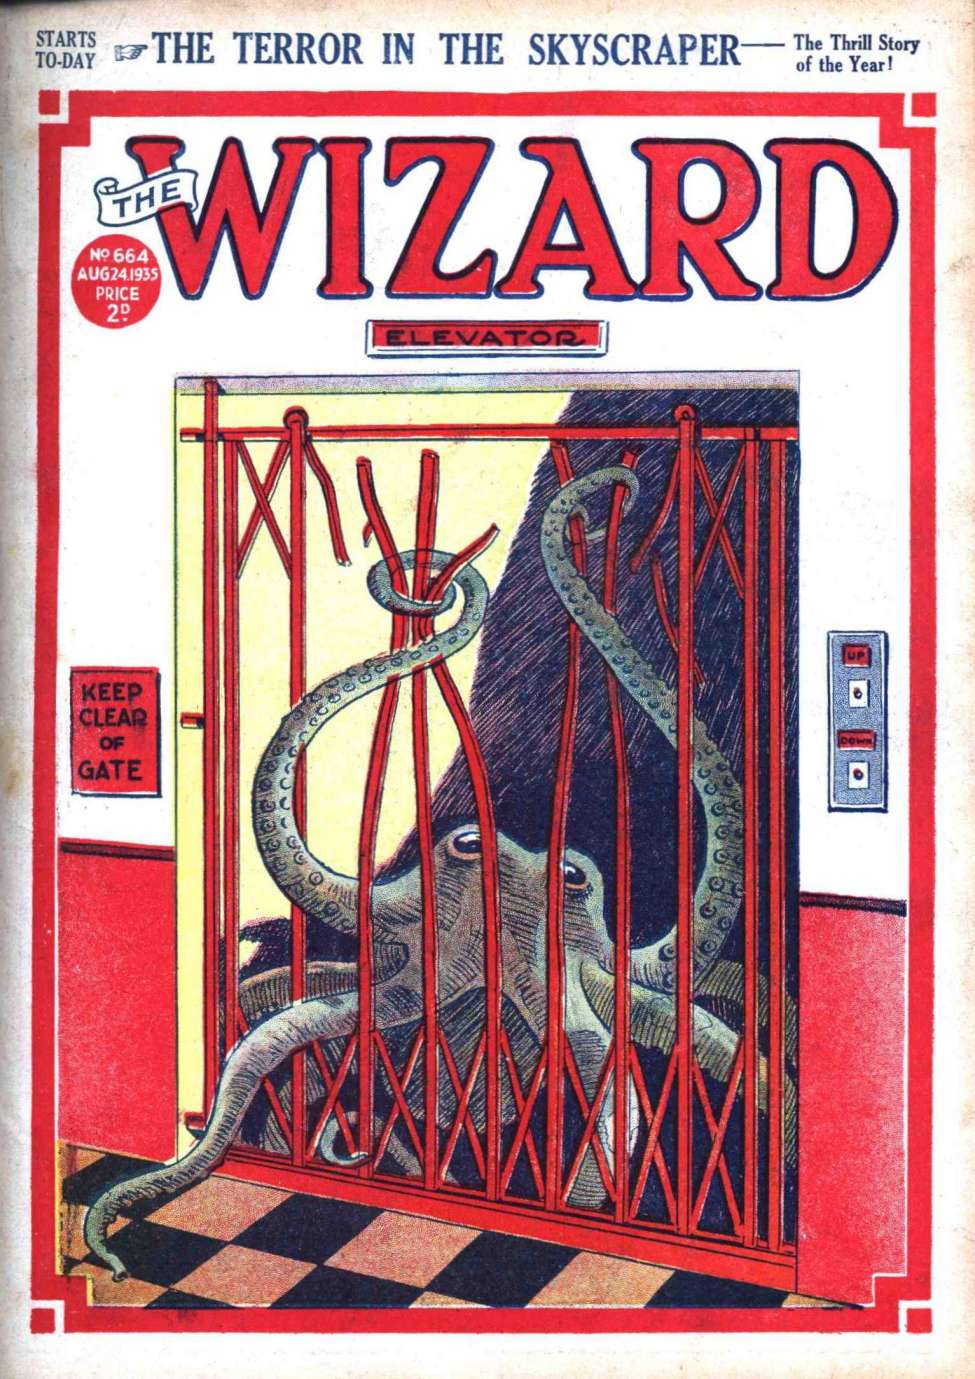 Book Cover For The Wizard 664